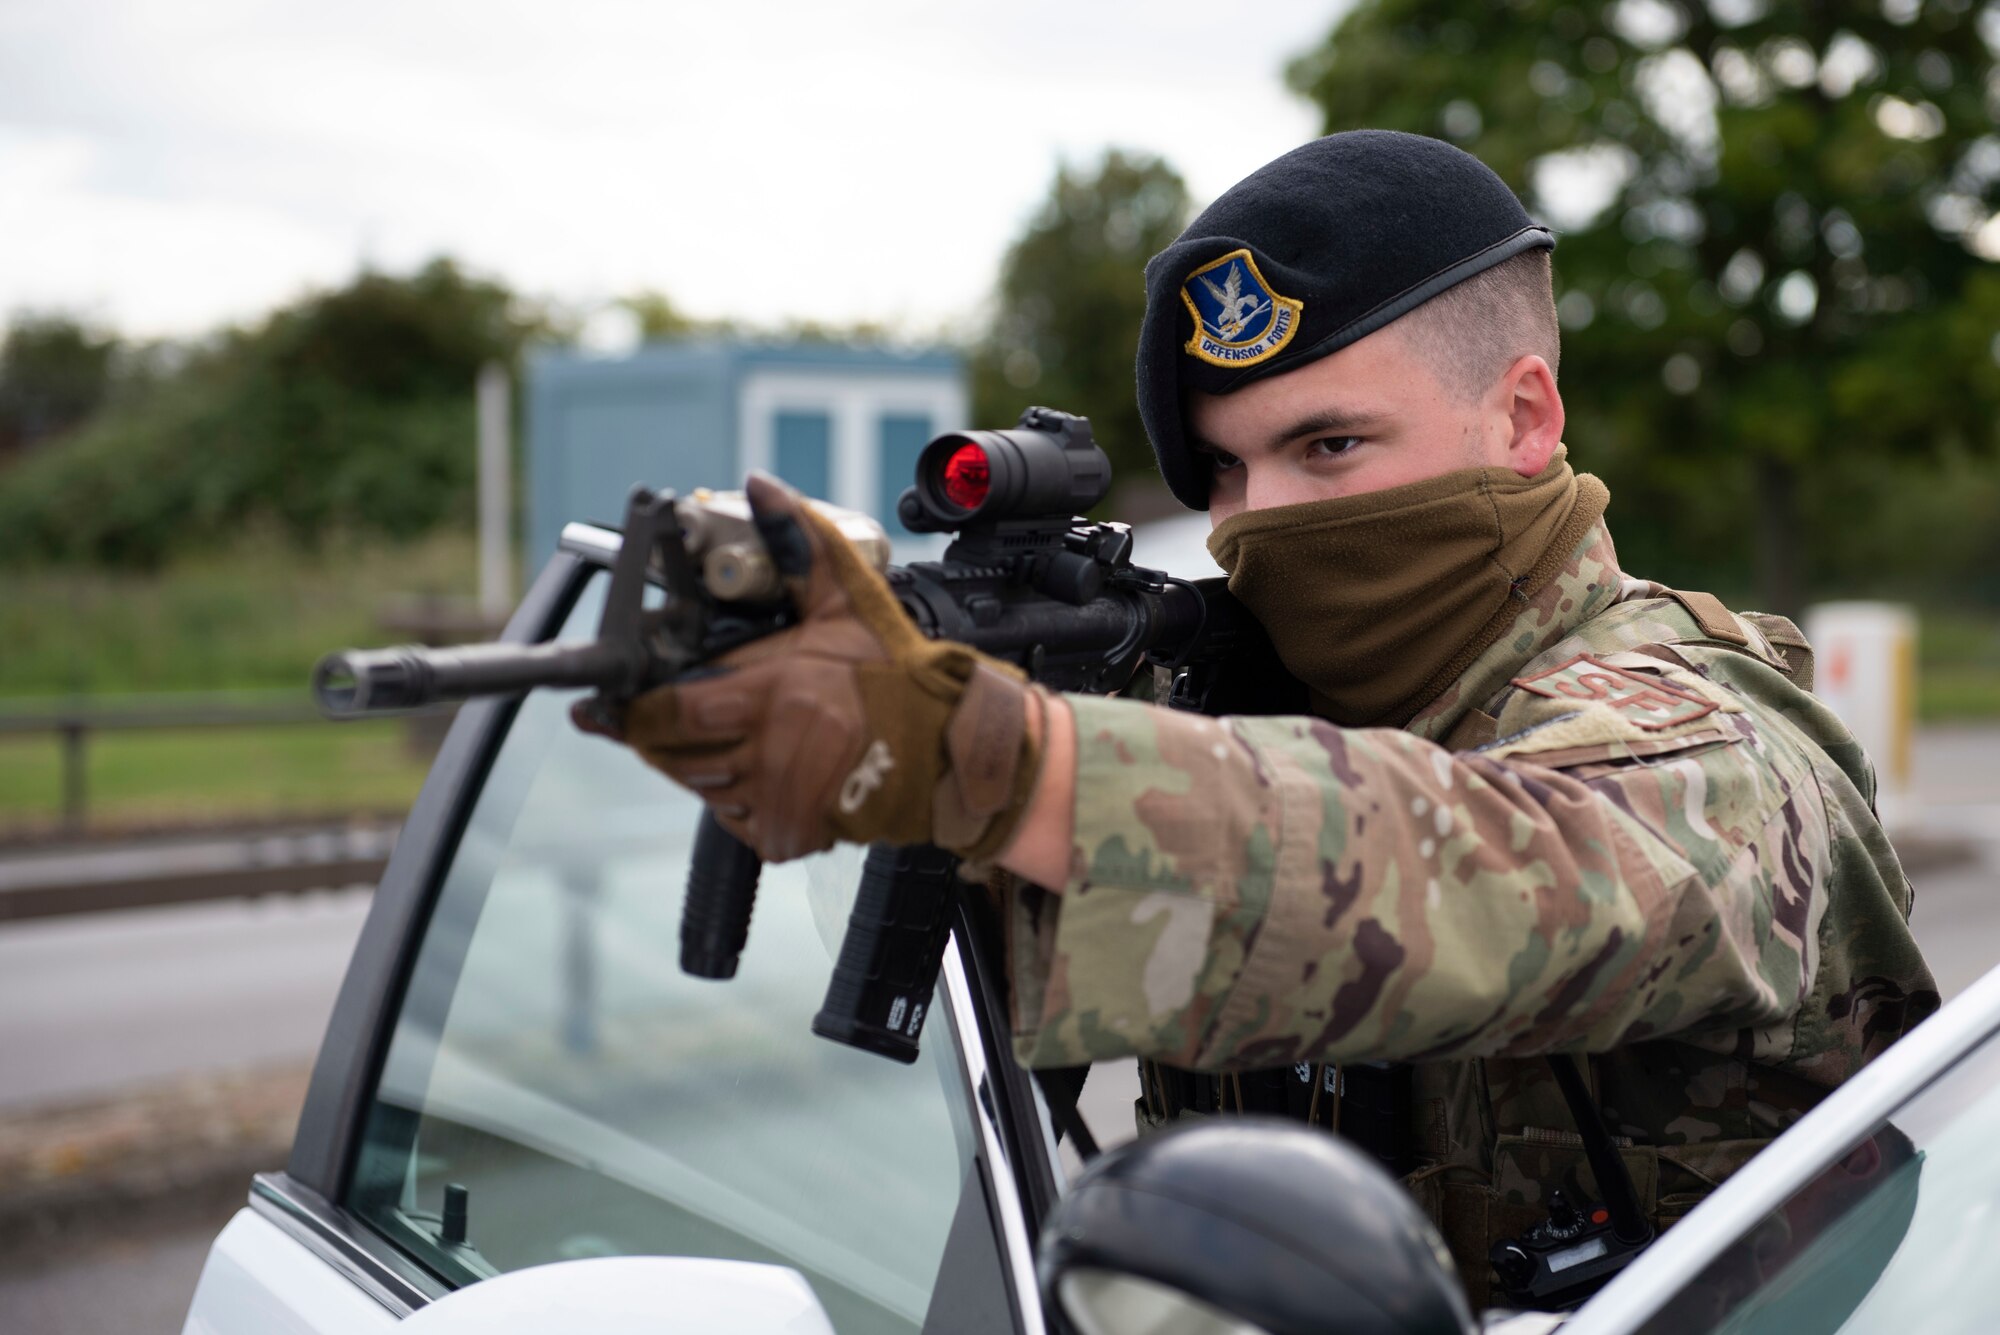 U.S. Air Force Senior Airman Josten Lacey, 423rd Security Forces Squadron (SFS) patrolman, conducts a high risk vehicle challenge during a training exercise at RAF Molesworth, England, July 28, 2020. 423rd SFS defenders conduct regular training and exercises to ensure mission readiness. (U.S. Air Force photo by Airman 1st Class Jennifer Zima)